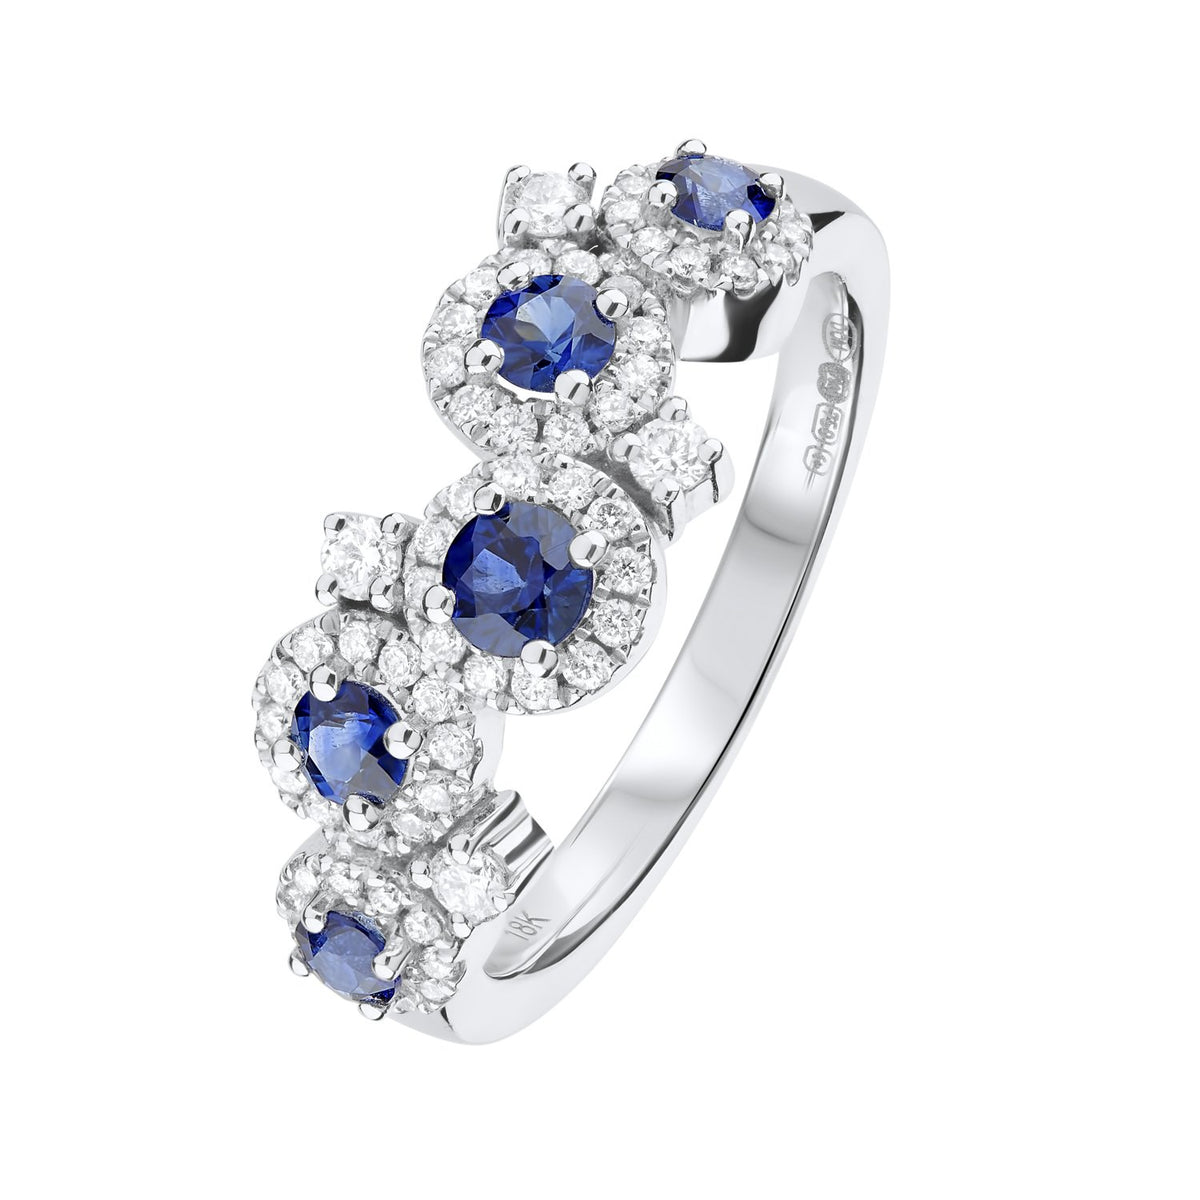 White Gold Diamond Halo Ring with Blue Sapphire Centre